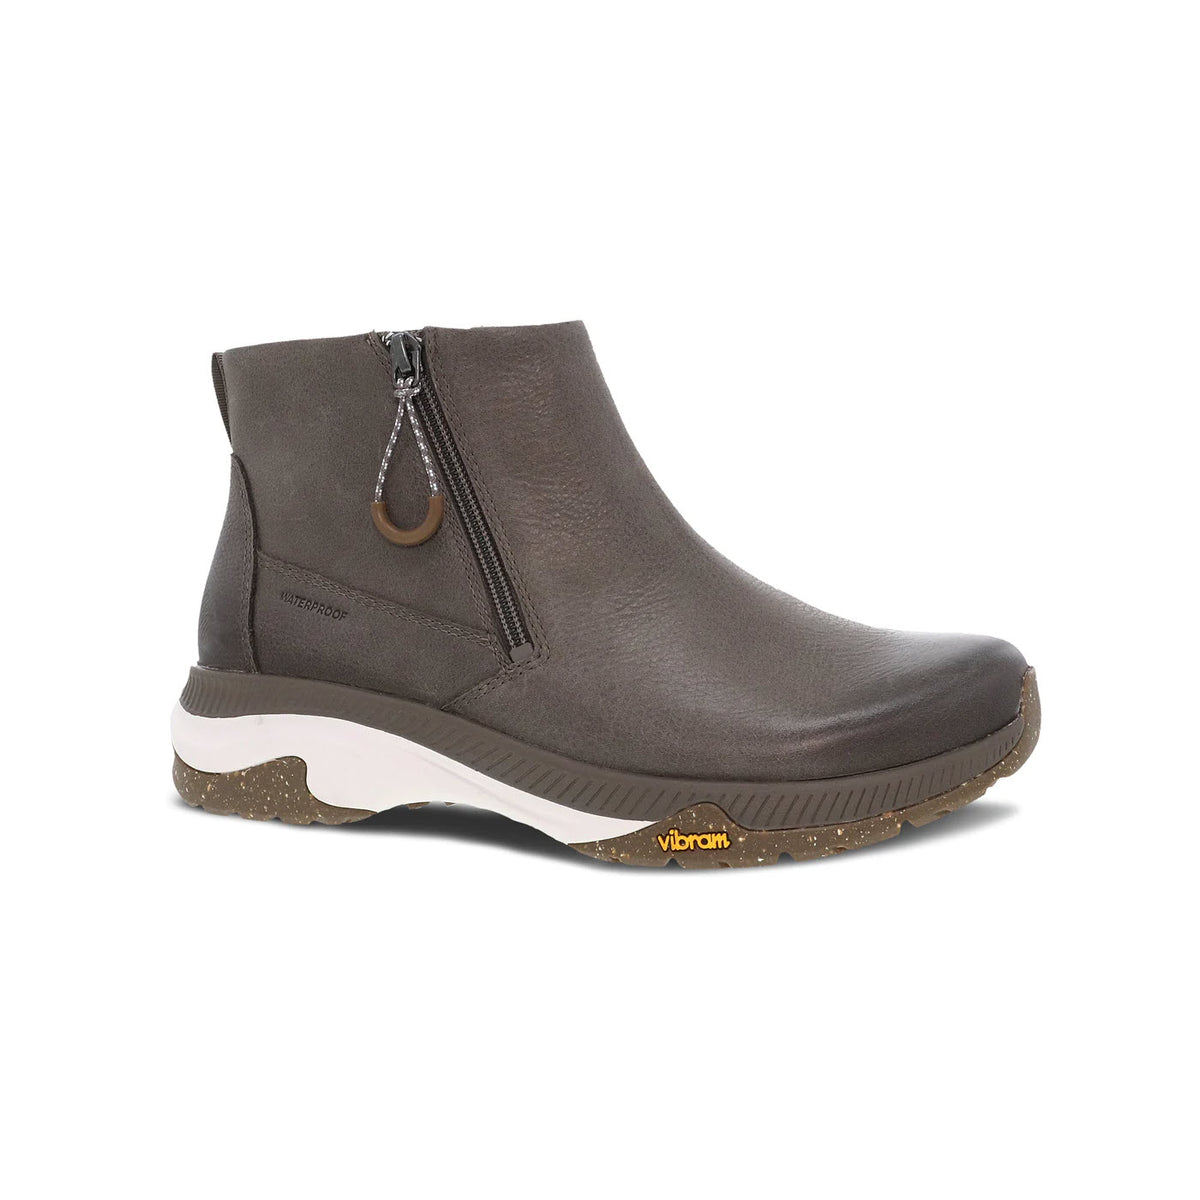 Dansko Margo Morel Burnished ankle boot with outdoor-inspired zipper and Vibram ECOSTEP sole isolated on a white background.